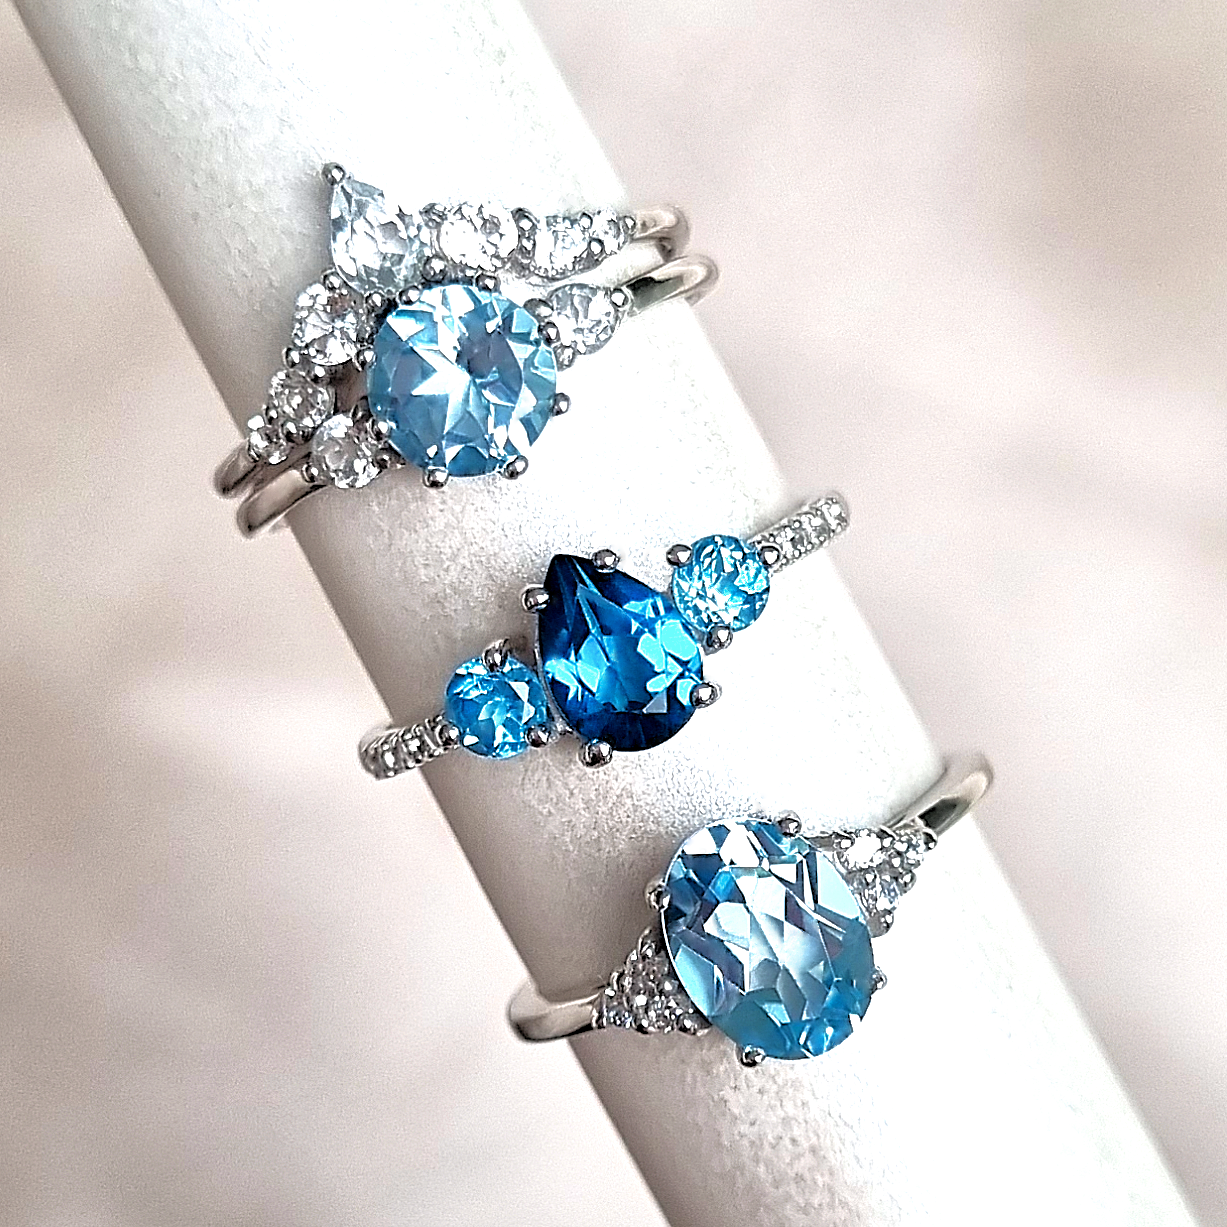 A group of blue gemstone rings including London blue, Swiss blue, sky blue topaz, white topaz engagement and wedding ring set in sterling sliver 